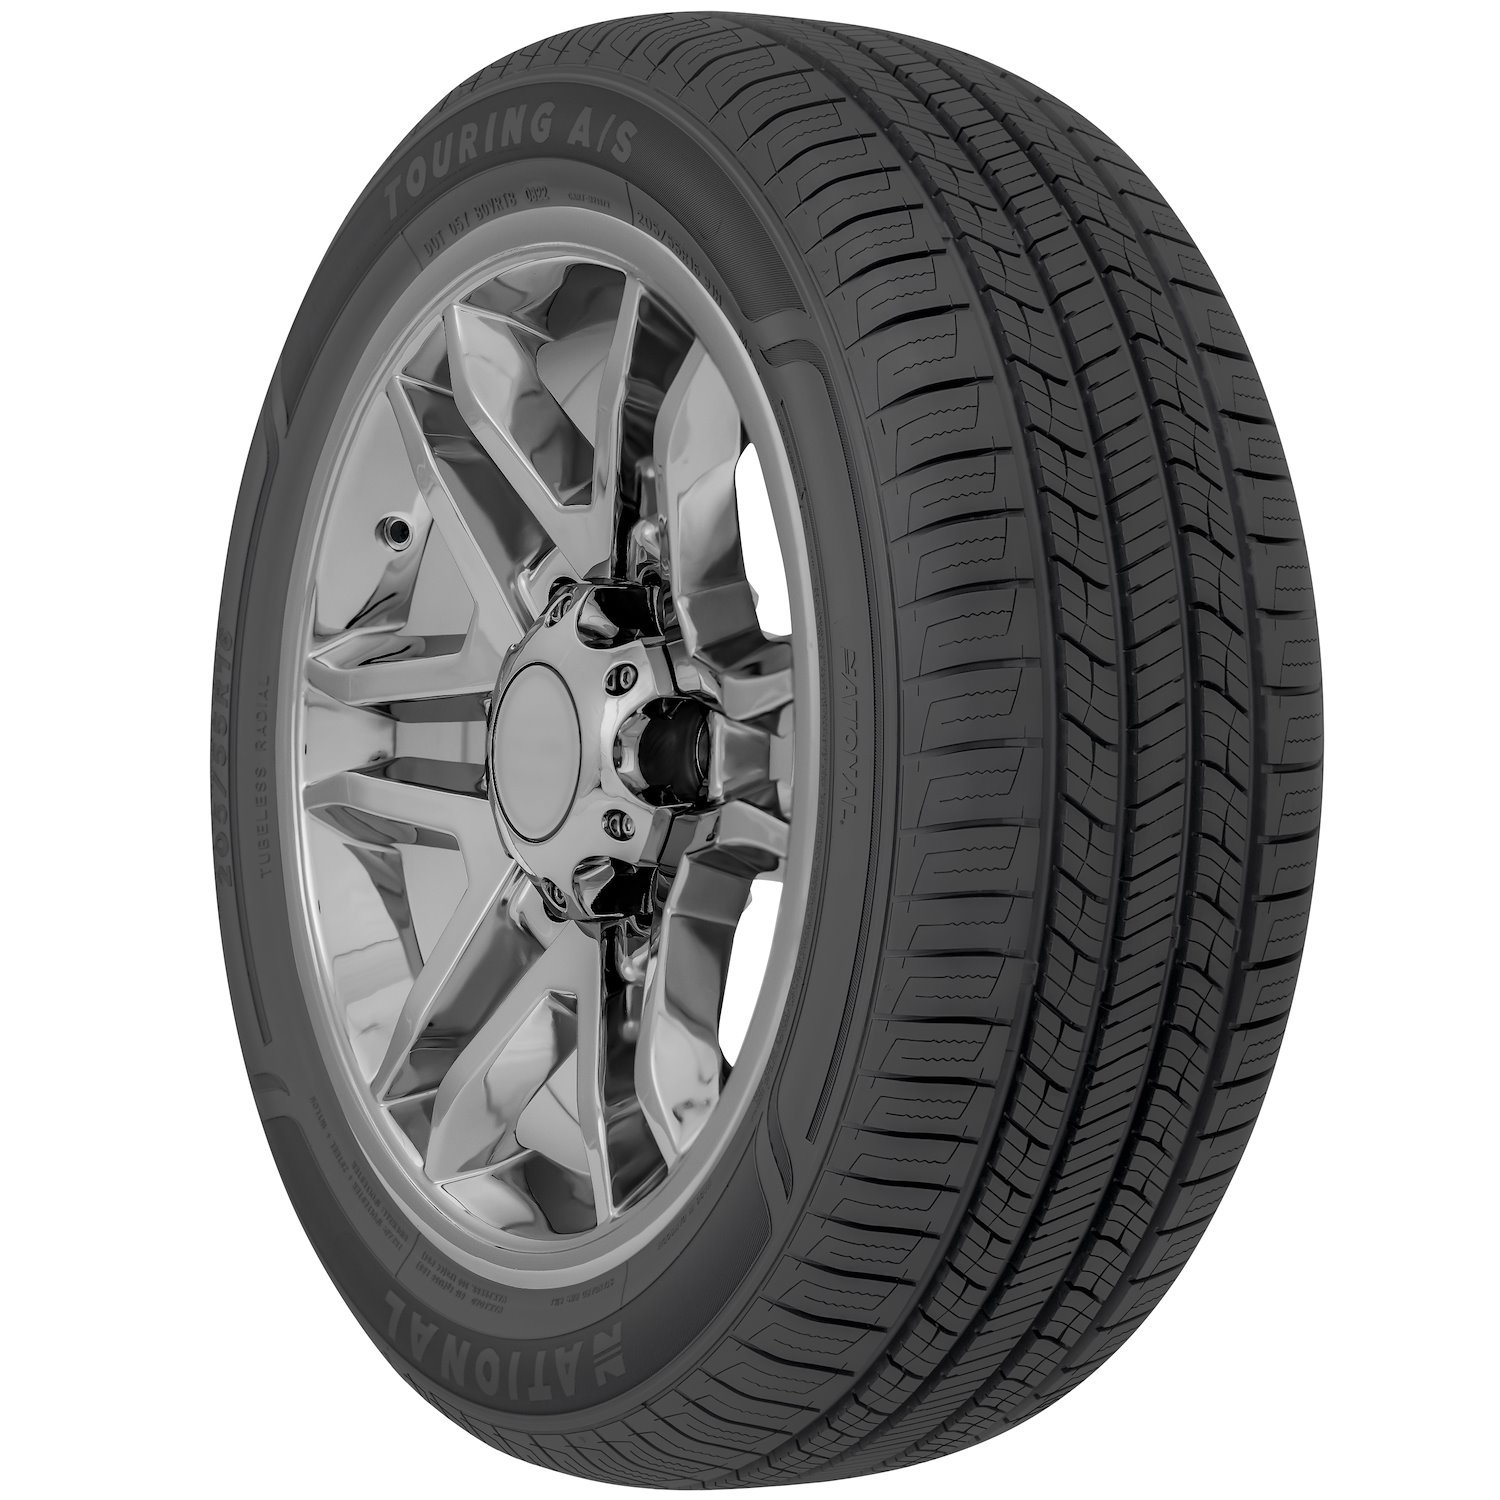 NLR96 Touring A/S Tire, 215/45R17